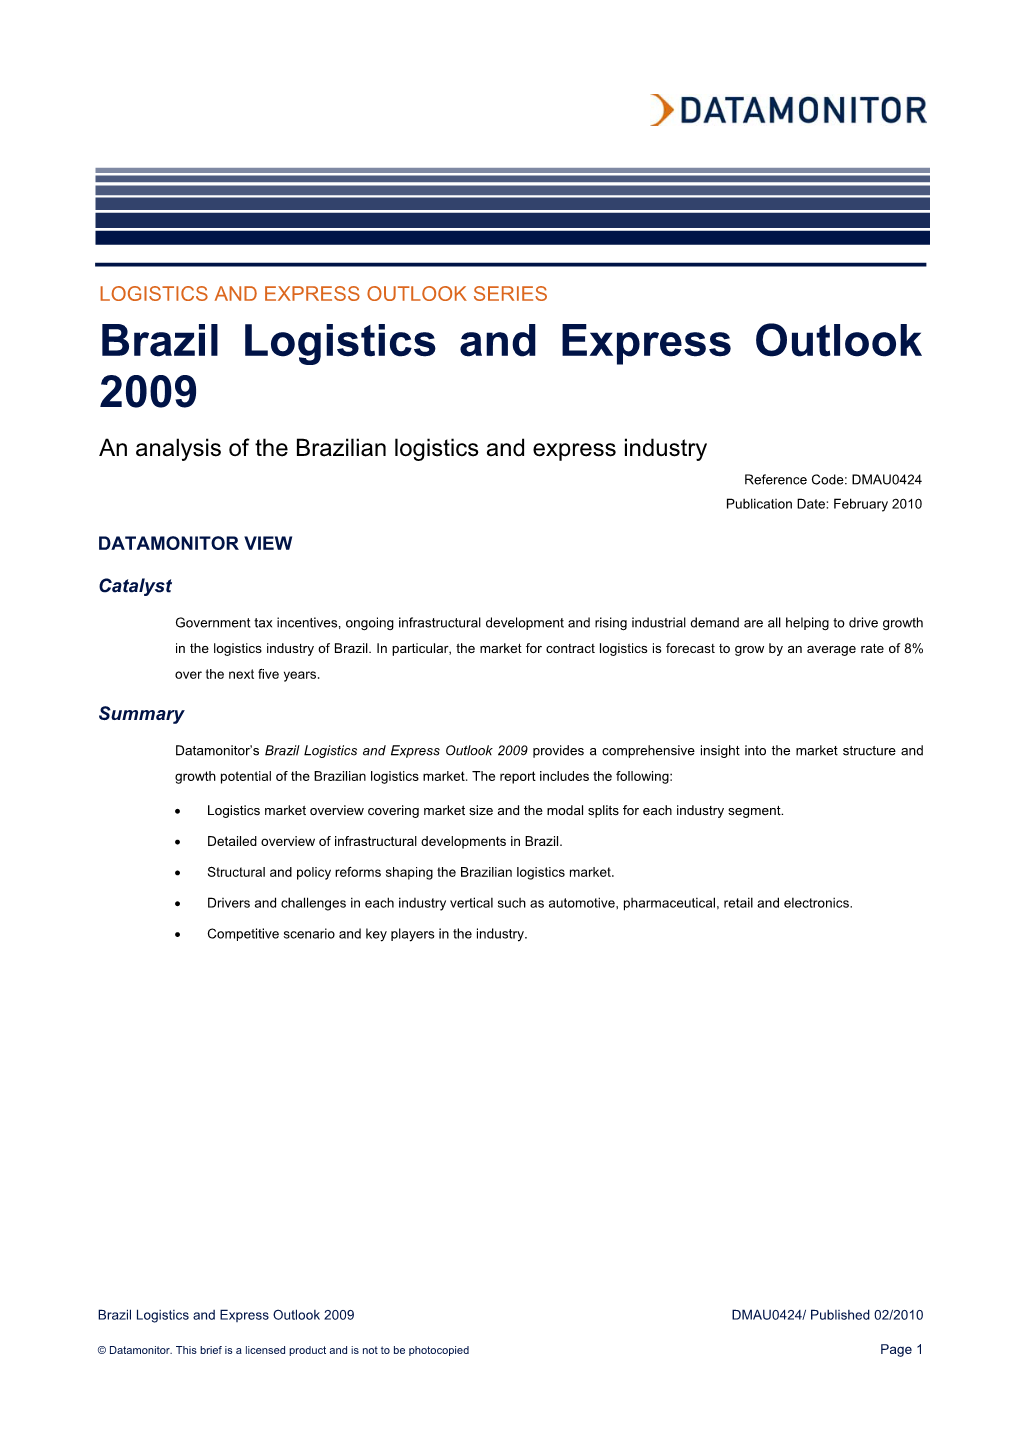 Brazil Logistics and Express Outlook 2009 an Analysis of the Brazilian Logistics and Express Industry Reference Code: DMAU0424 Publication Date: February 2010